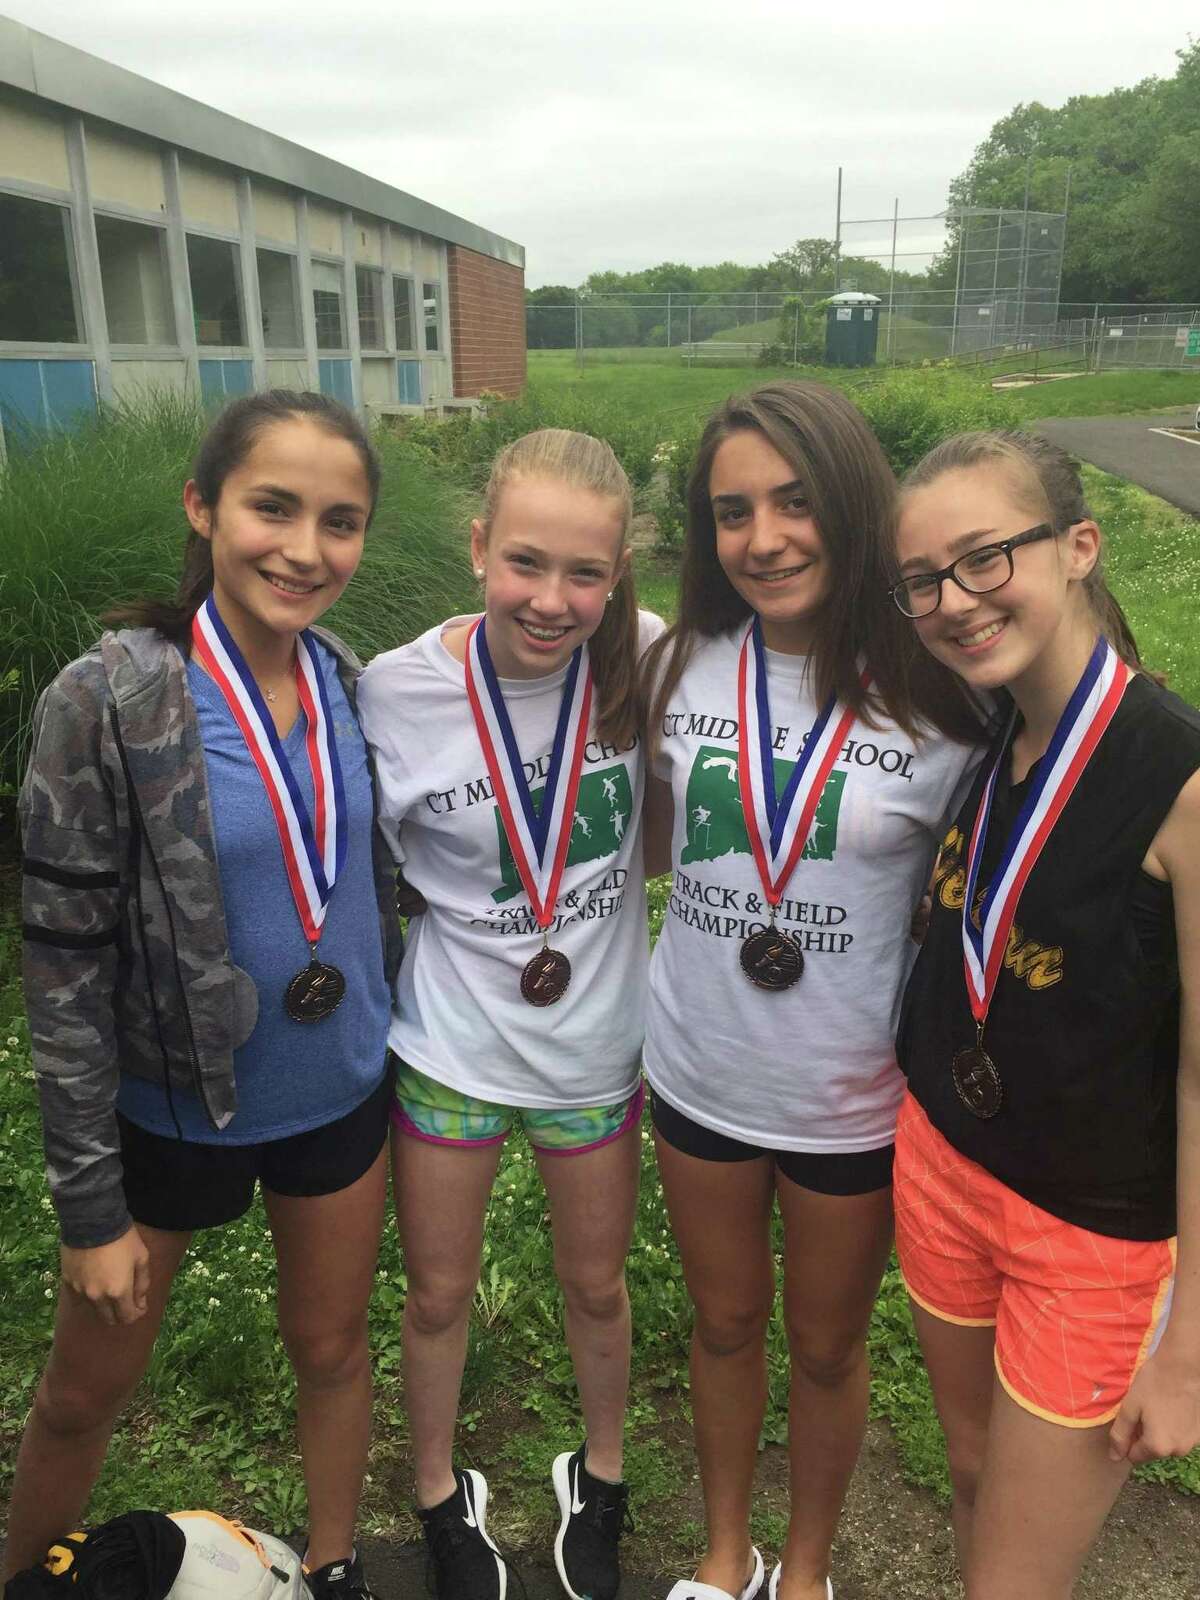 From left to right, Alexandra Klein, Daniela Pompa, Bianca Granitto and Gigi Barter of Western Middle School placed fifth in the 4x400 relay race.